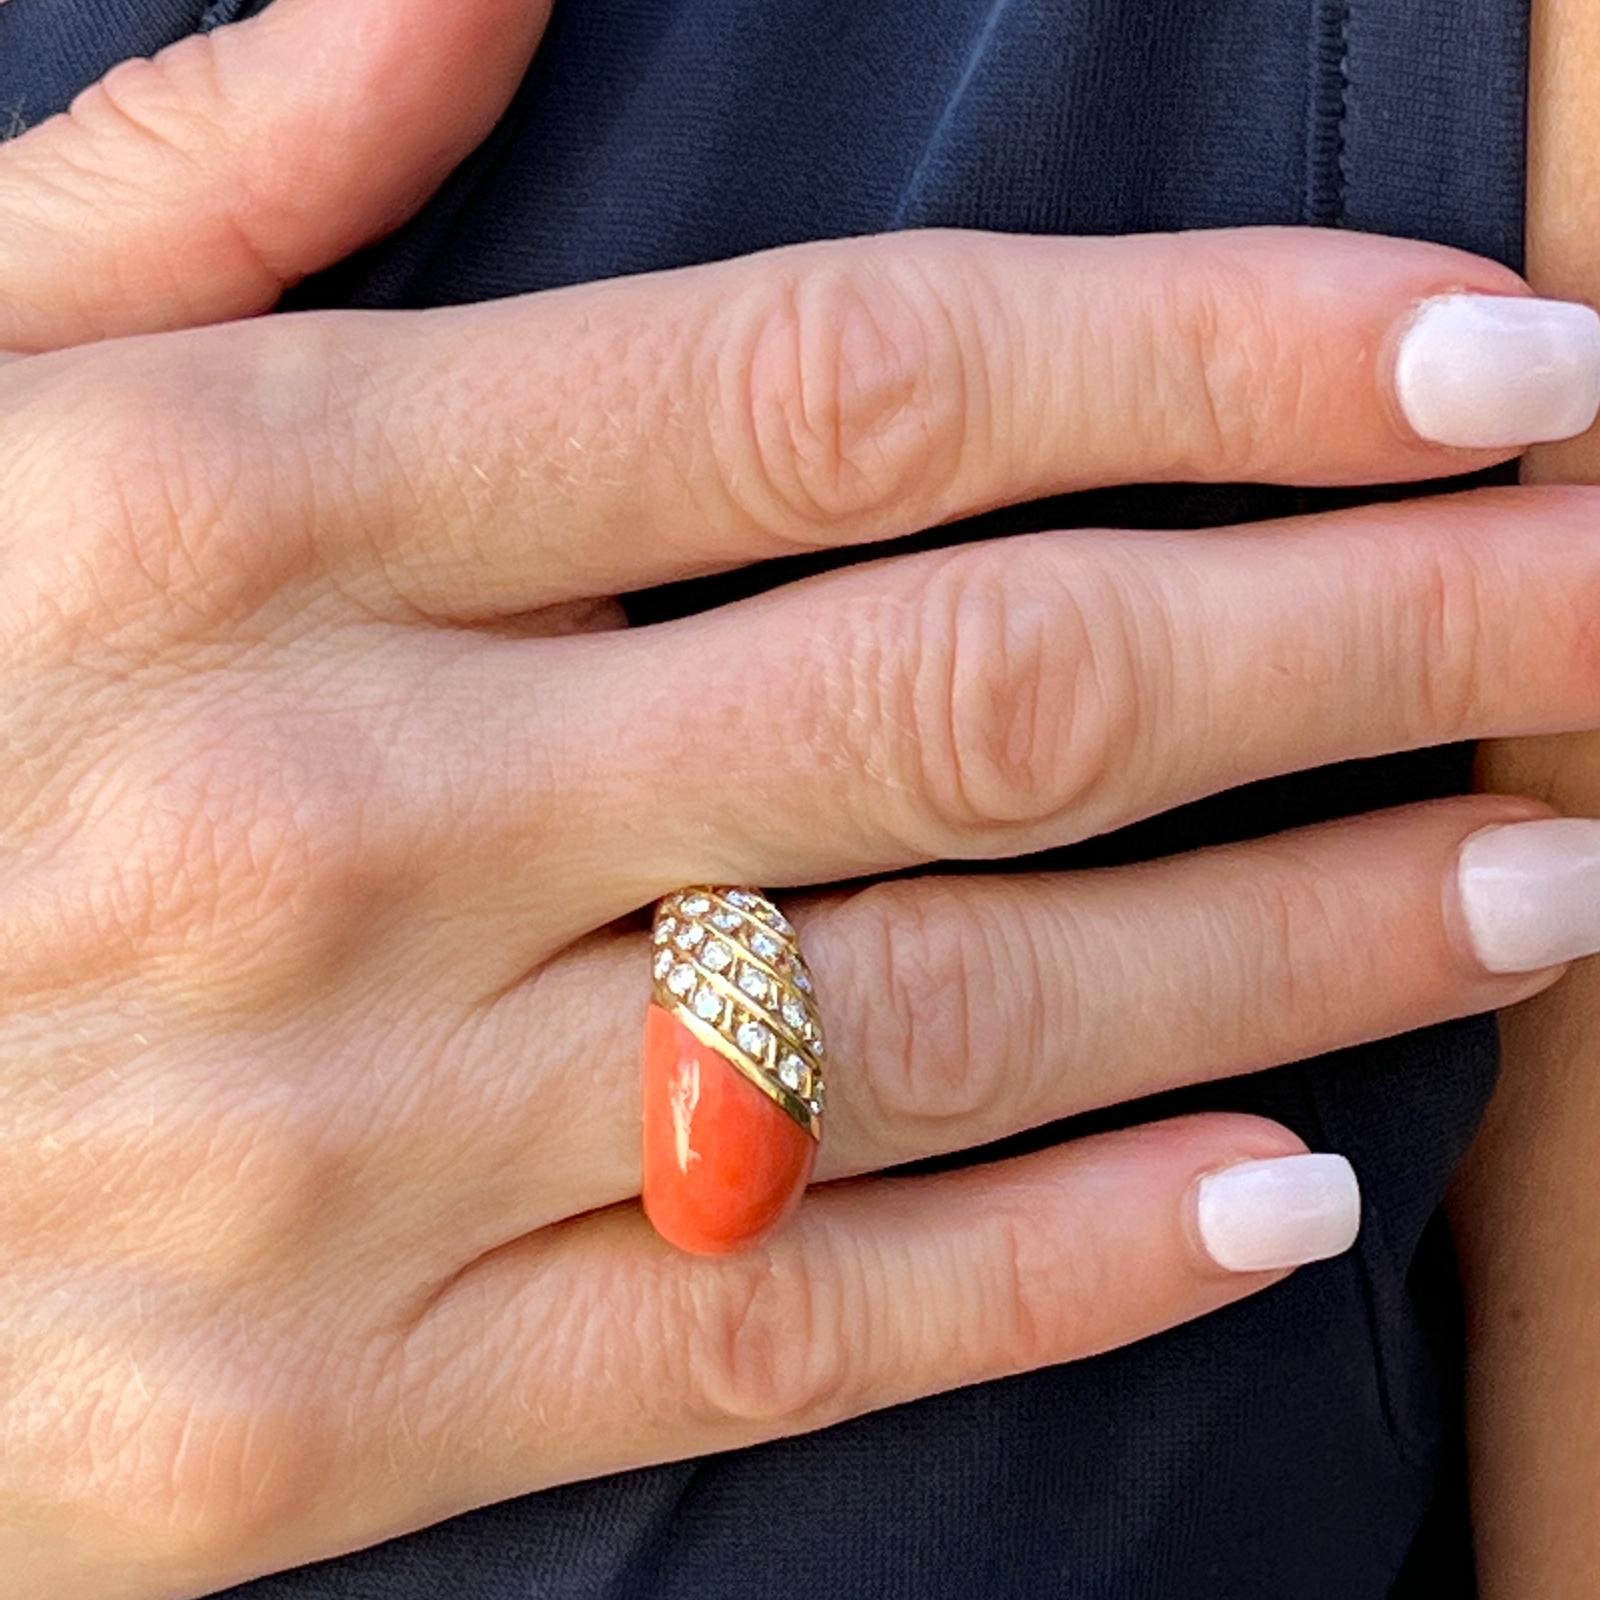 Beautiful diamond and coral dome ring handcrafted in 18 karat yellow gold. The ring features 26 round brilliant cut diamonds weighing approximately .78 carat total weight and graded G-H color and VS clarity. The cabochon coral has a rich orange